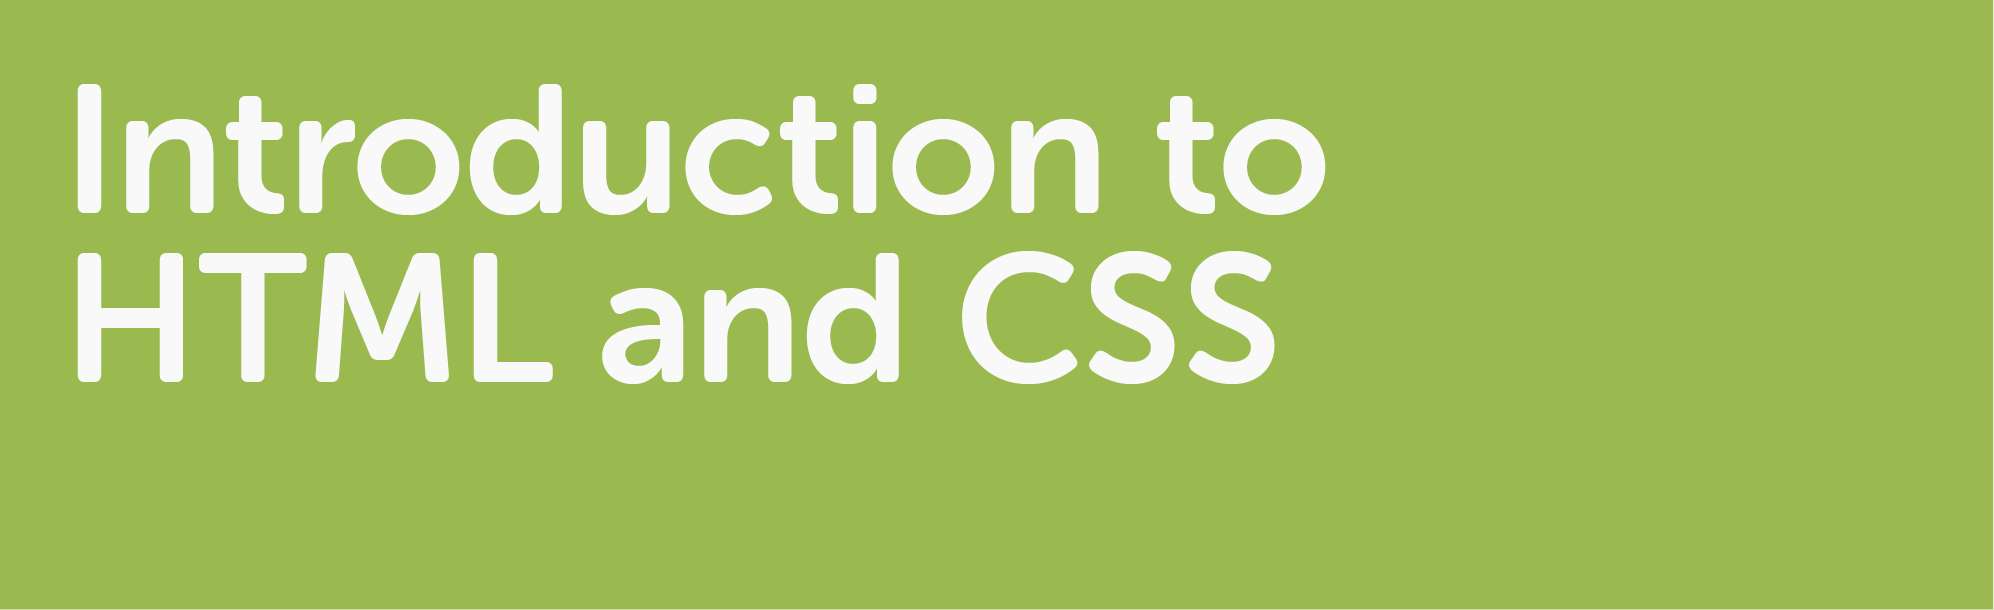 Header image for the HTML/CSS workshop